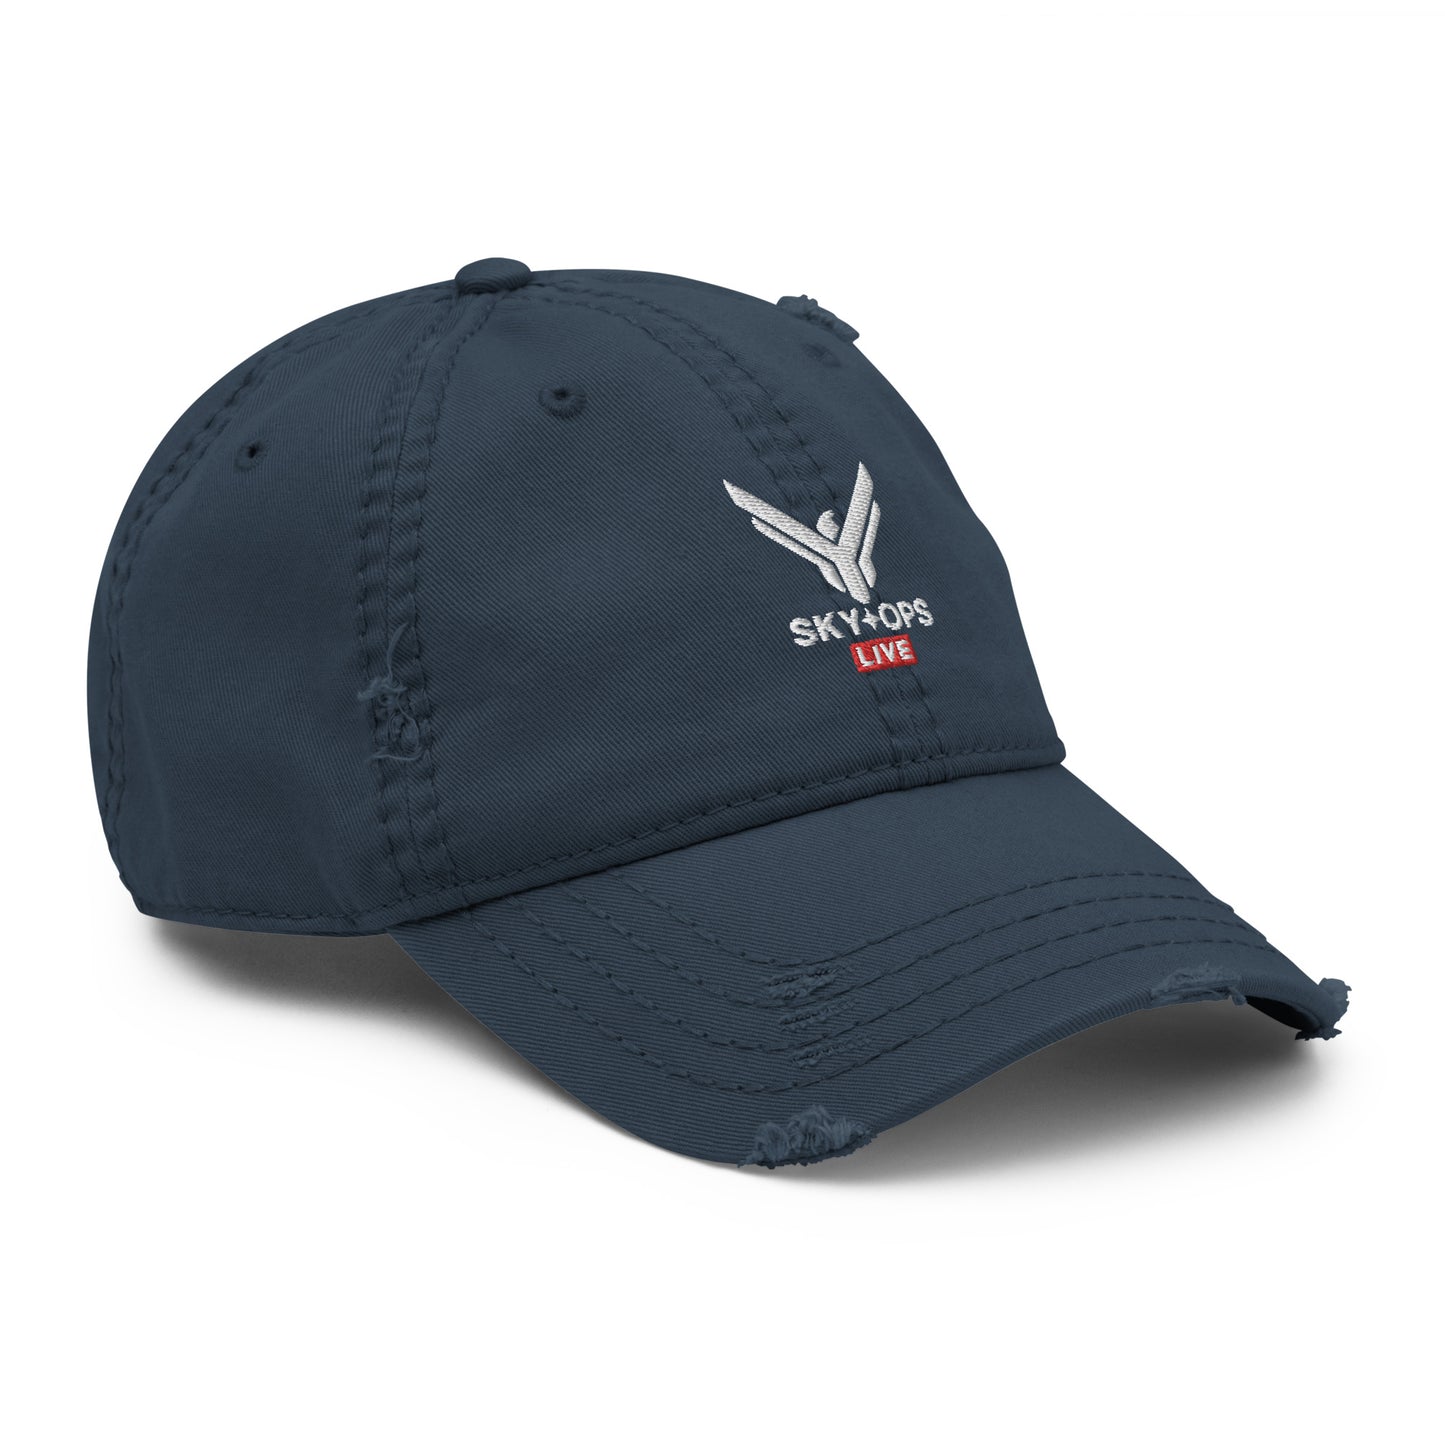 Distressed Dad Hat - Sky Ops Live Classic Logo